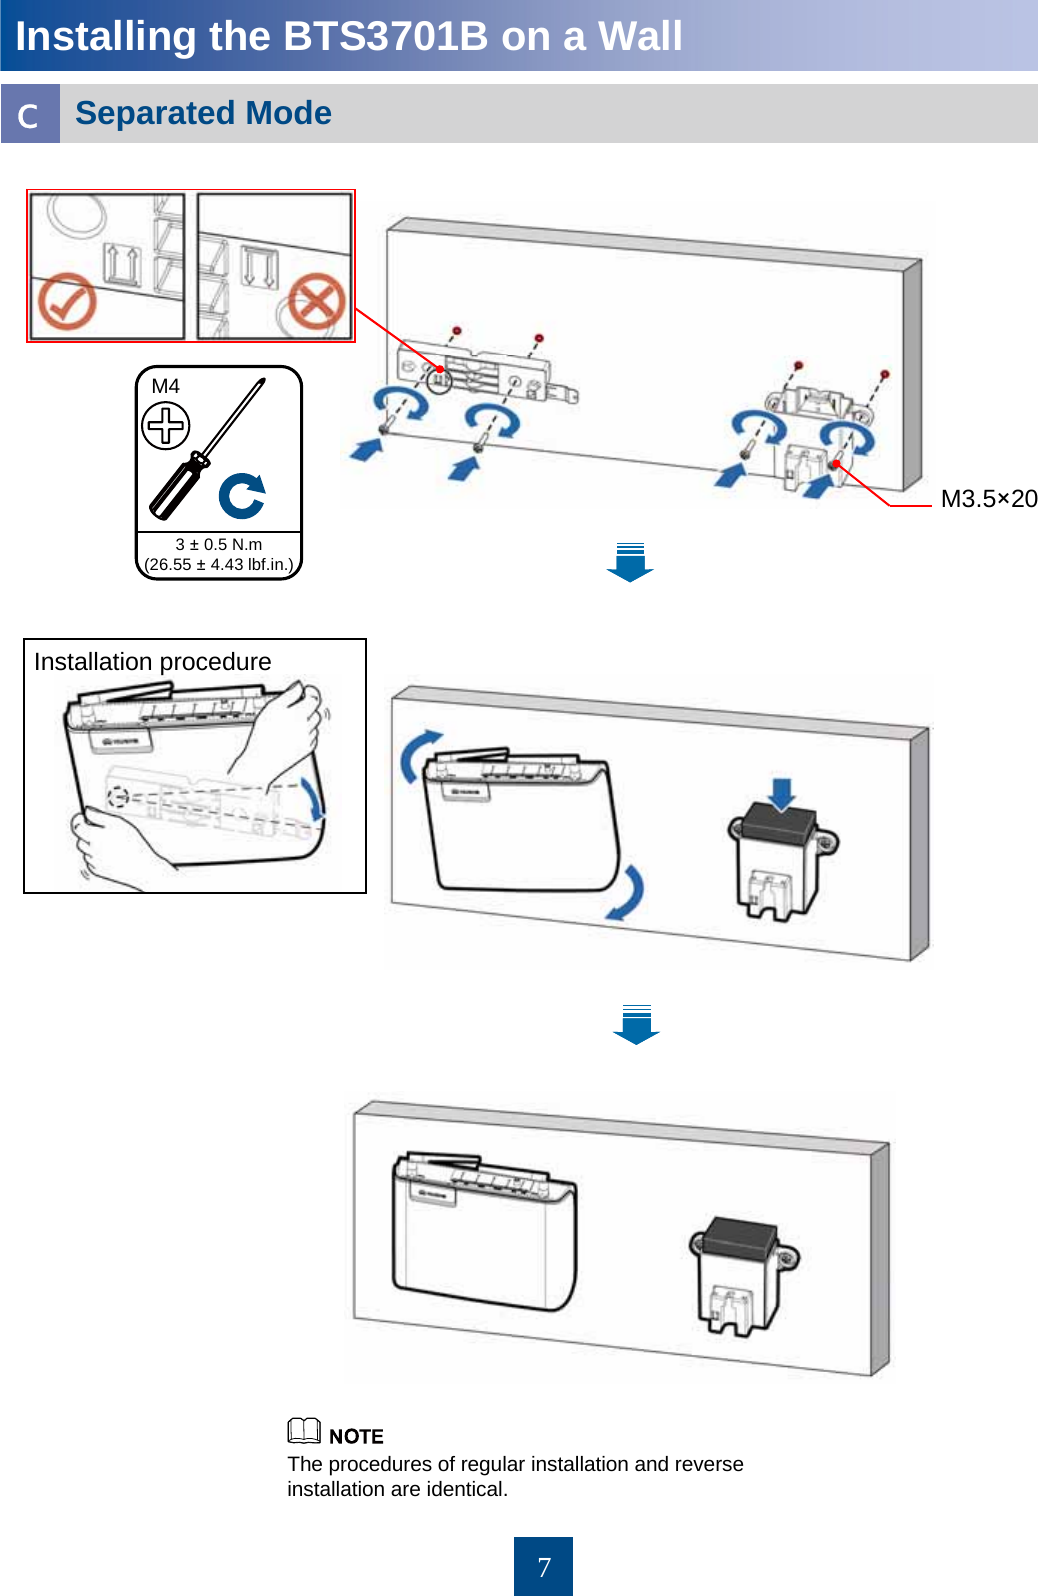 7Installing the BTS3701B on a WallcSeparated Mode 3 ±0.5 N.m (26.55 ±4.43 lbf.in.)M4The procedures of regular installation and reverse installation are identical. Installation procedureM3.5×20